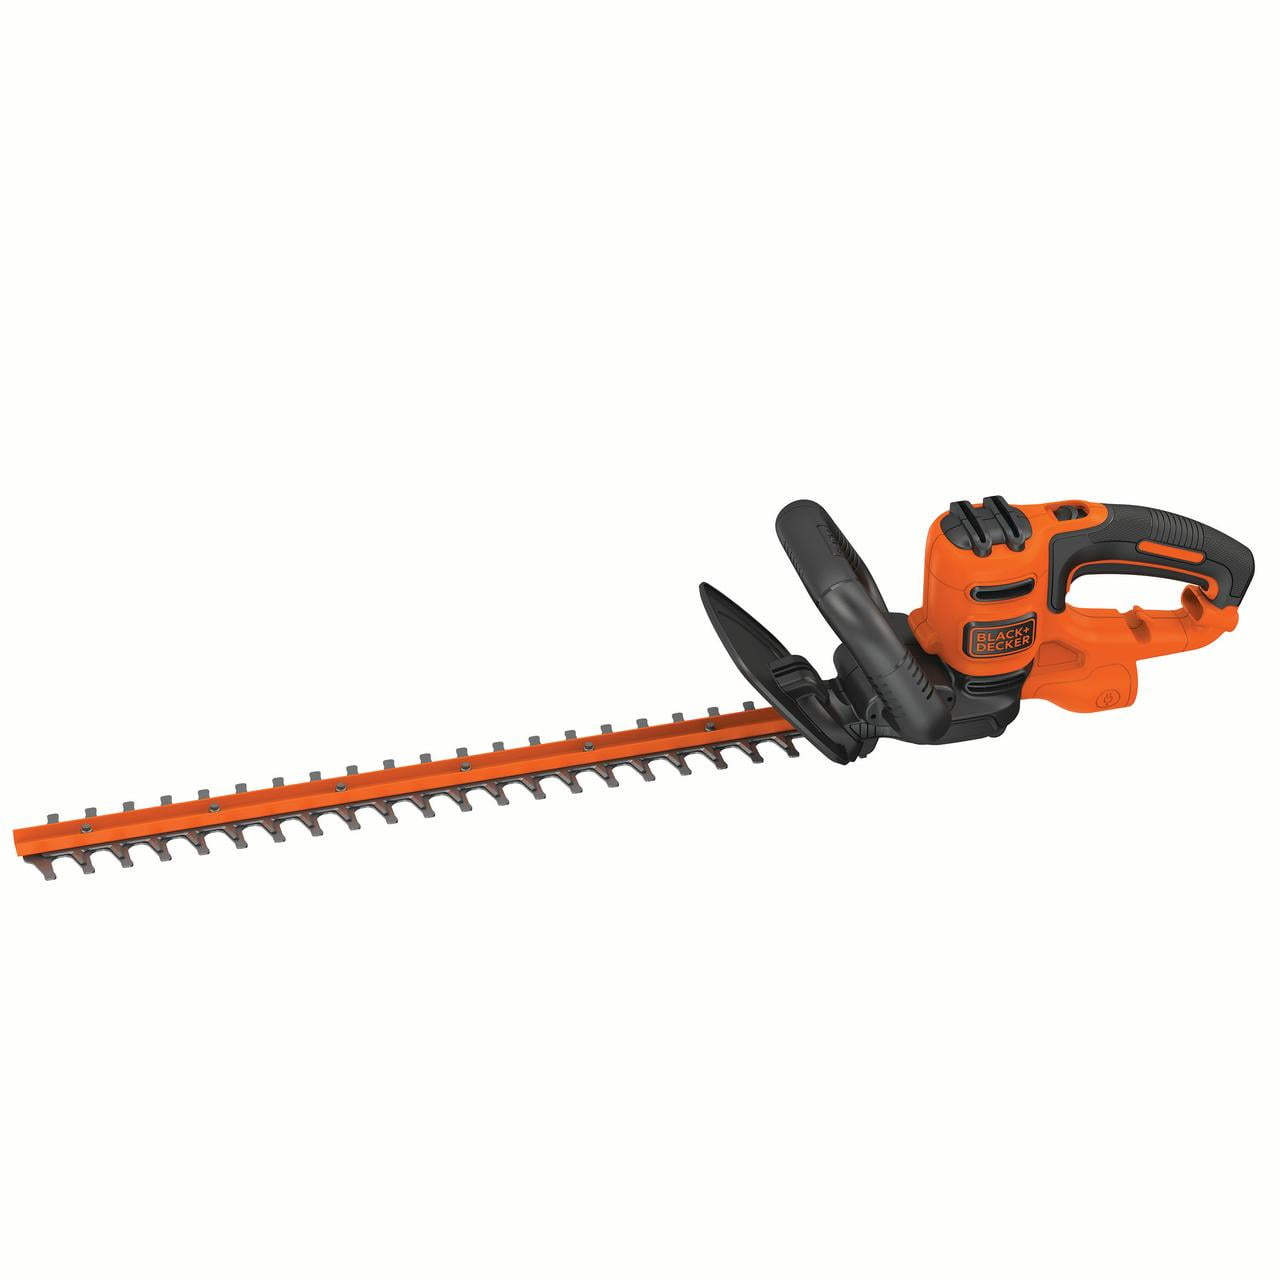 7301575 18 X 0.625 In. 3.5a Steel Corded Hedge Trimmer 3.5 Amps, Assorted